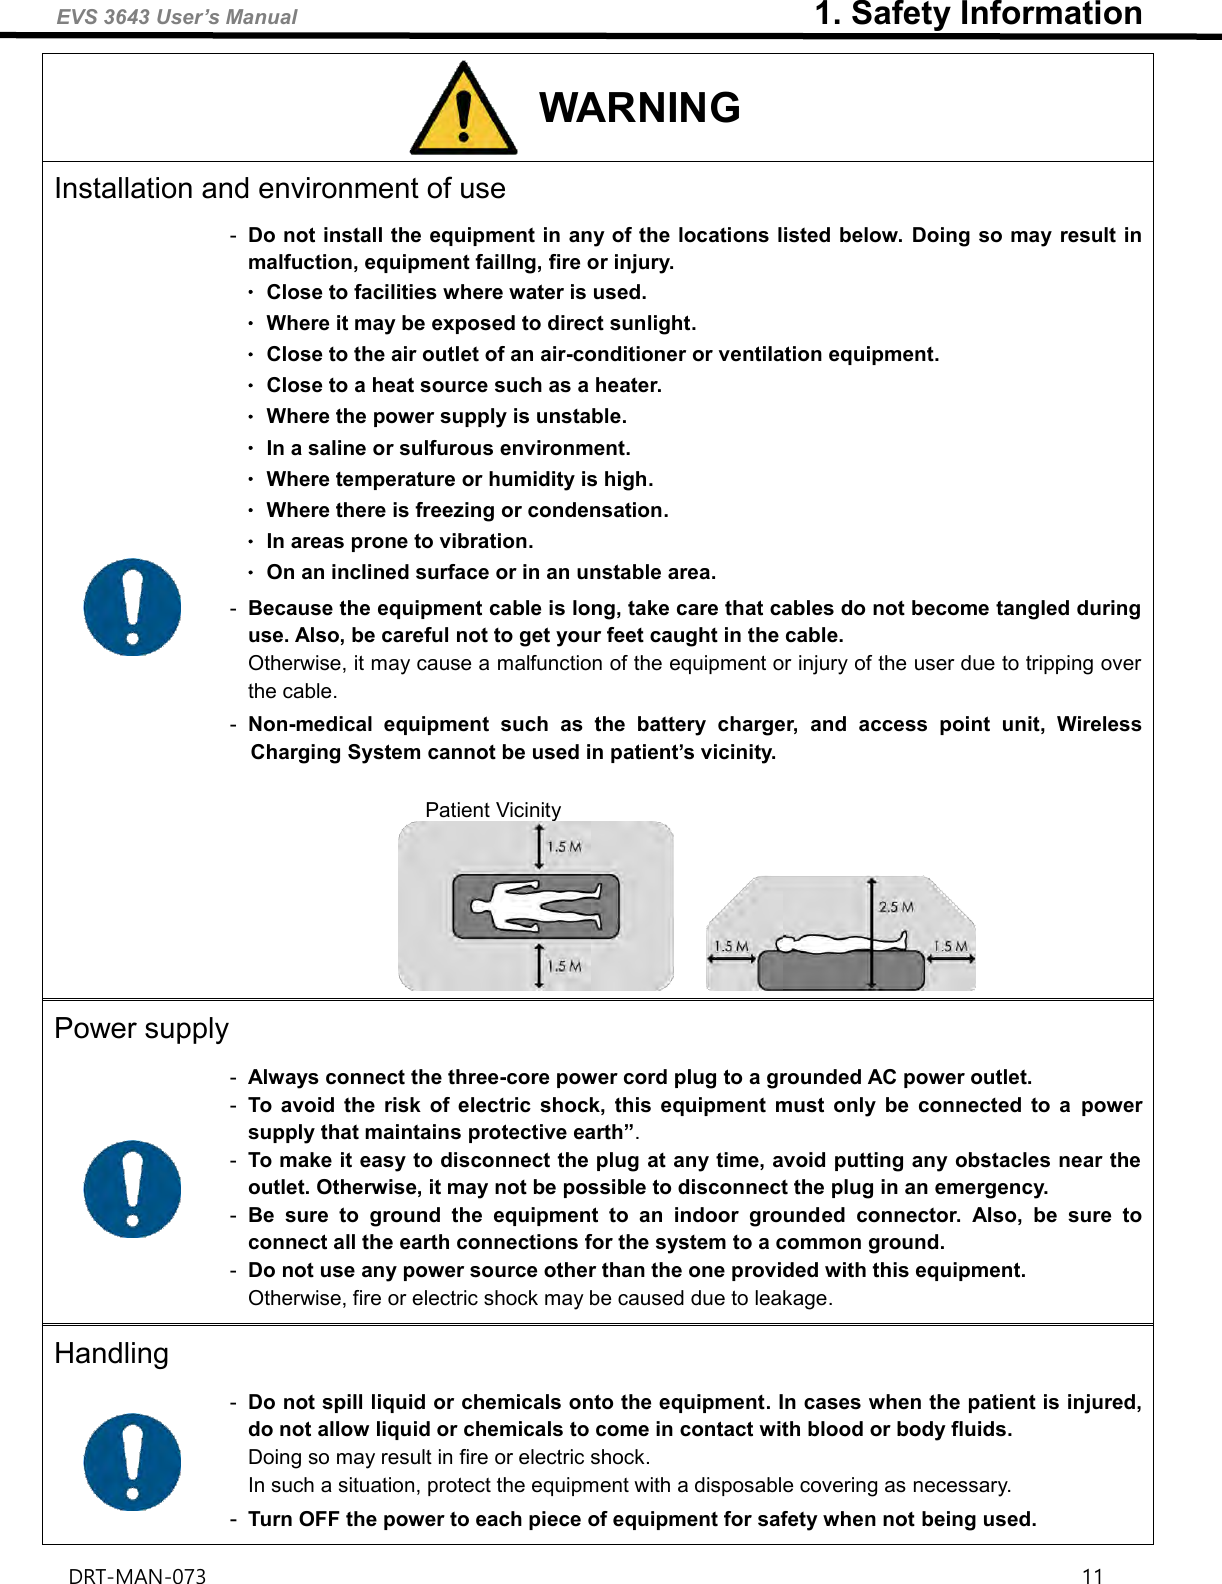 EVS 3643 User’s Manual                               1. Safety Information DRT-MAN-073                                                                                                                                                                11   WARNING Installation and environment of use  -  Do not install the equipment in any of the locations listed below. Doing so may result in malfuction, equipment faillng, fire or injury. ㆍClose to facilities where water is used. ㆍWhere it may be exposed to direct sunlight. ㆍClose to the air outlet of an air-conditioner or ventilation equipment. ㆍClose to a heat source such as a heater. ㆍWhere the power supply is unstable. ㆍIn a saline or sulfurous environment. ㆍWhere temperature or humidity is high. ㆍWhere there is freezing or condensation. ㆍIn areas prone to vibration. ㆍOn an inclined surface or in an unstable area. -  Because the equipment cable is long, take care that cables do not become tangled during use. Also, be careful not to get your feet caught in the cable. Otherwise, it may cause a malfunction of the equipment or injury of the user due to tripping over the cable. -  Non-medical  equipment  such  as  the  battery  charger,  and  access  point  unit,  Wireless Charging System cannot be used in patient’s vicinity.  Patient Vicinity  Power supply  -  Always connect the three-core power cord plug to a grounded AC power outlet. -  To  avoid  the  risk  of  electric  shock,  this  equipment  must  only  be  connected  to  a  power supply that maintains protective earth”. -  To make it easy to disconnect the plug at any time, avoid putting any obstacles near the outlet. Otherwise, it may not be possible to disconnect the plug in an emergency. -  Be  sure  to  ground  the  equipment  to  an  indoor  grounded  connector.  Also,  be  sure  to connect all the earth connections for the system to a common ground. -  Do not use any power source other than the one provided with this equipment. Otherwise, fire or electric shock may be caused due to leakage. Handling  -  Do not spill liquid or chemicals onto the equipment. In cases when the patient is injured, do not allow liquid or chemicals to come in contact with blood or body fluids. Doing so may result in fire or electric shock. In such a situation, protect the equipment with a disposable covering as necessary. -  Turn OFF the power to each piece of equipment for safety when not being used. 